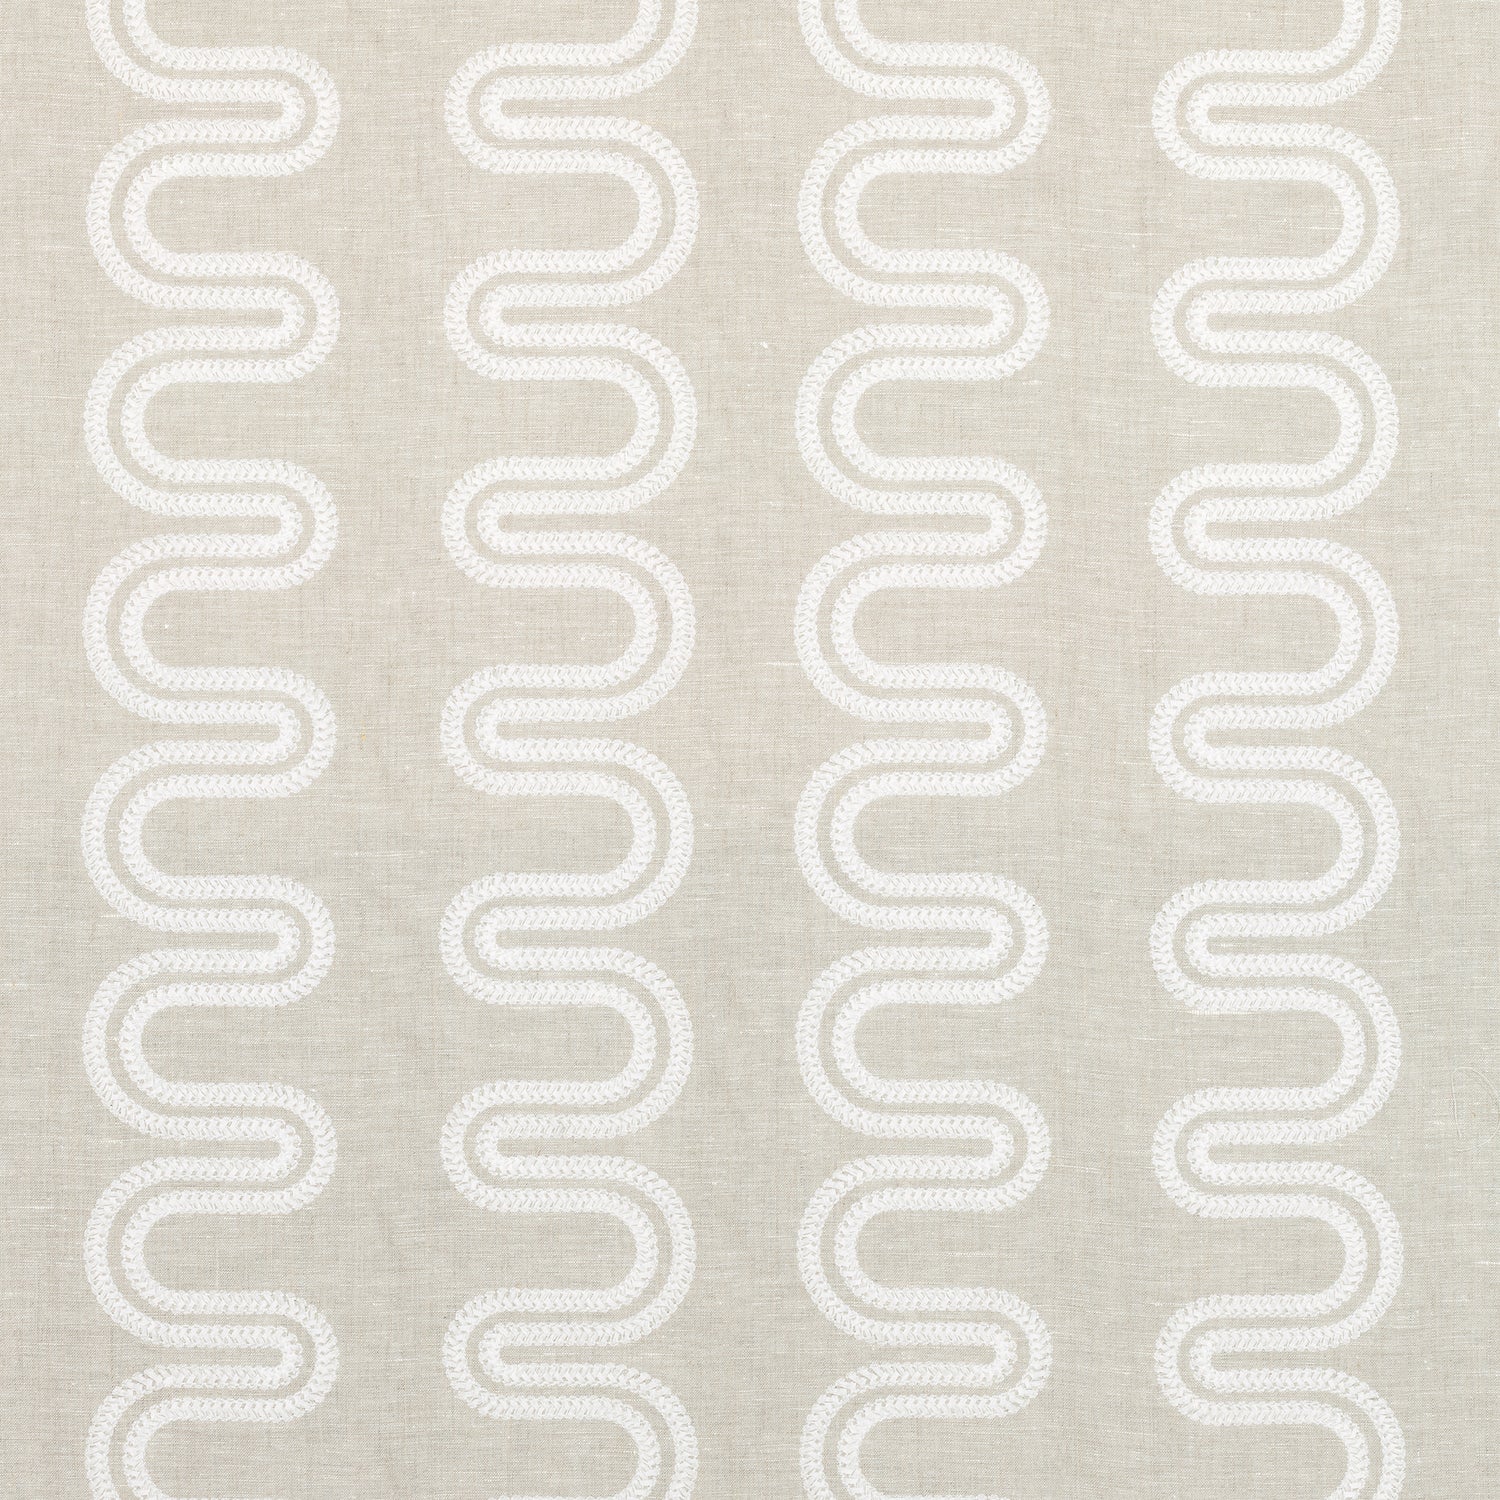 Herriot Way Embroidery fabric in white on flax  color - pattern number AF9639 - by Anna French in the Savoy collection